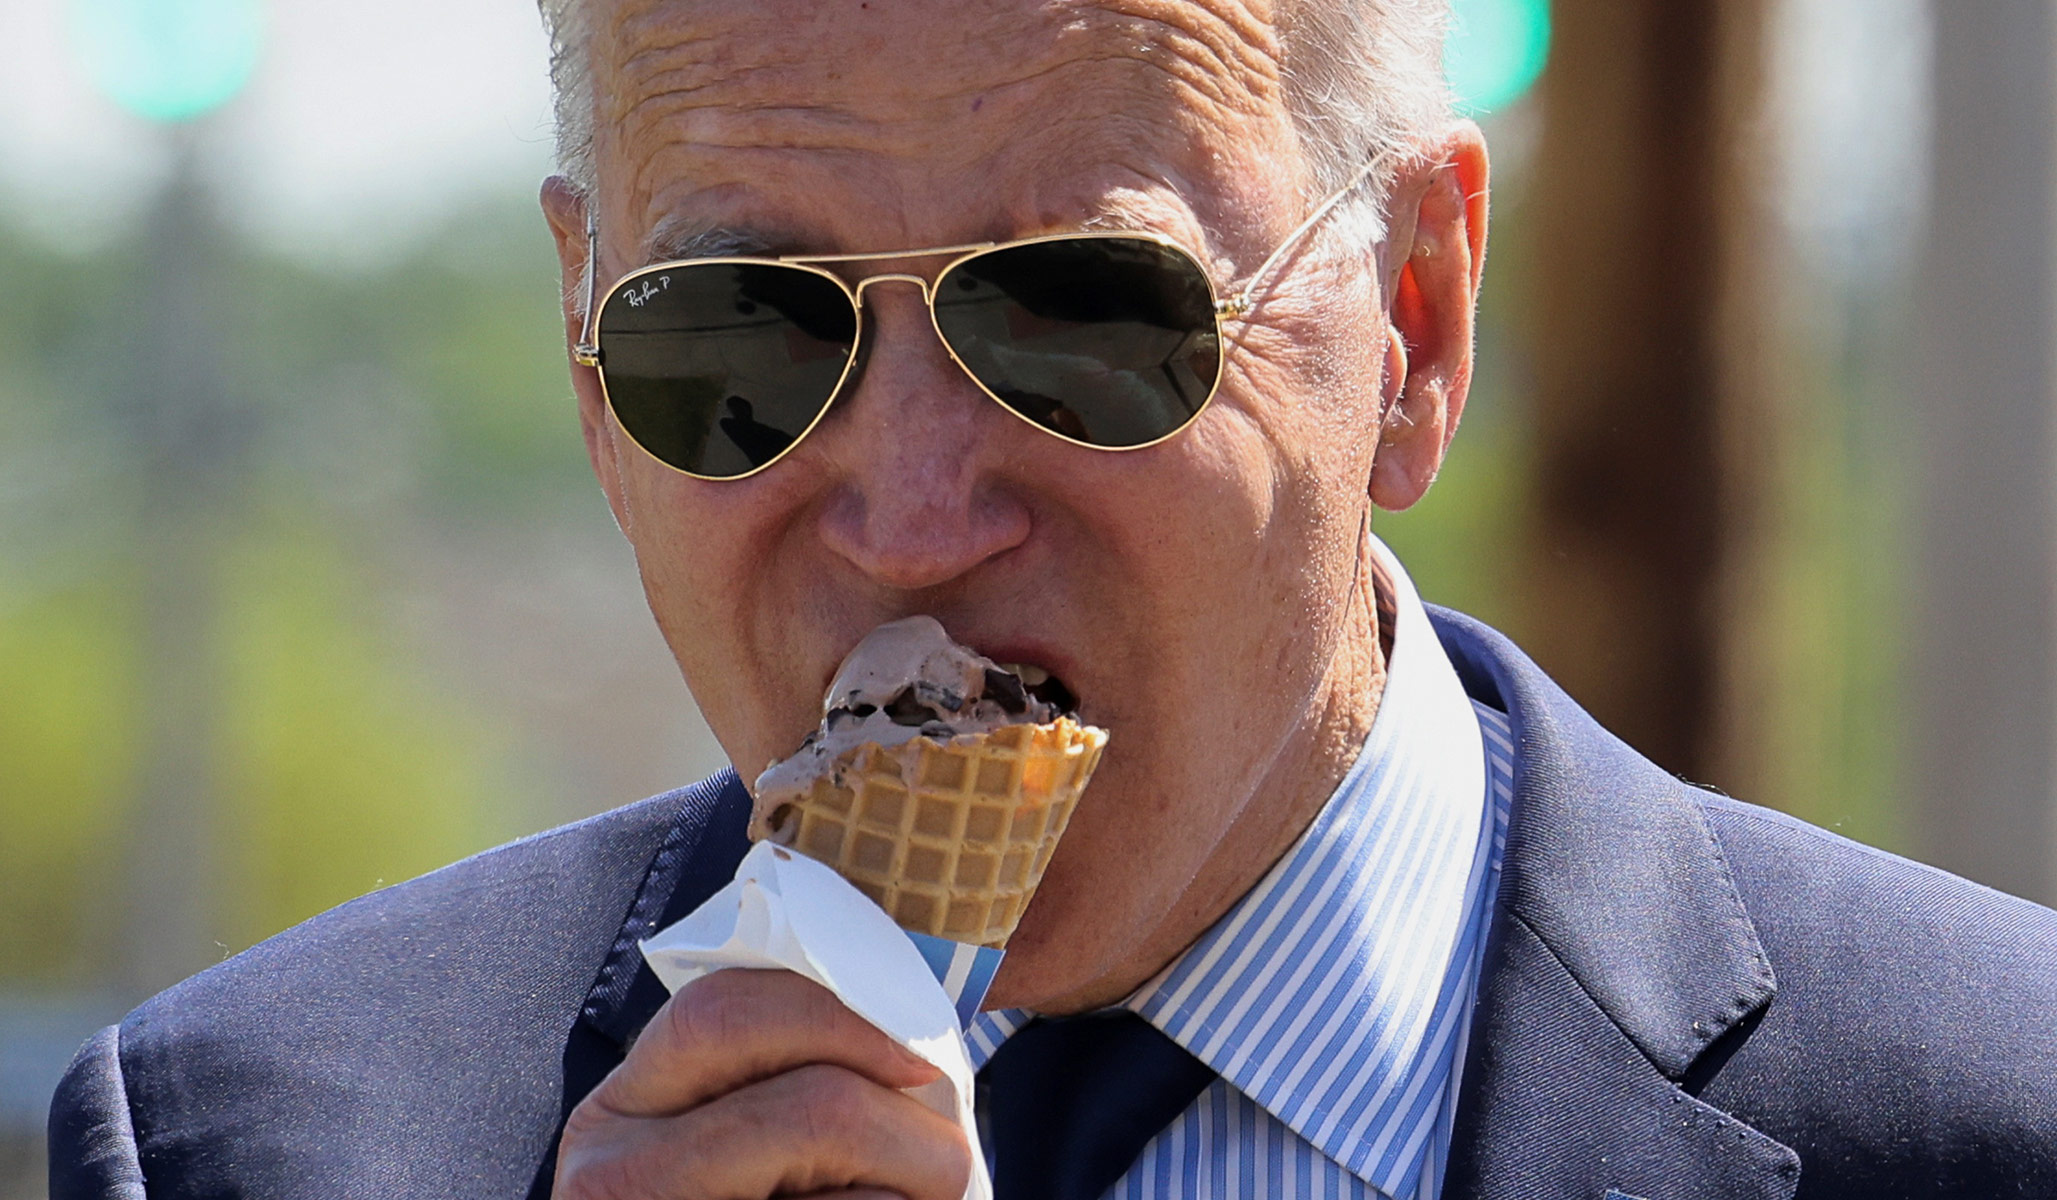 kjole Se tilbage Rejse Biden Rambled About Ice Cream Before Discussing the Nashville Shooting |  National Review